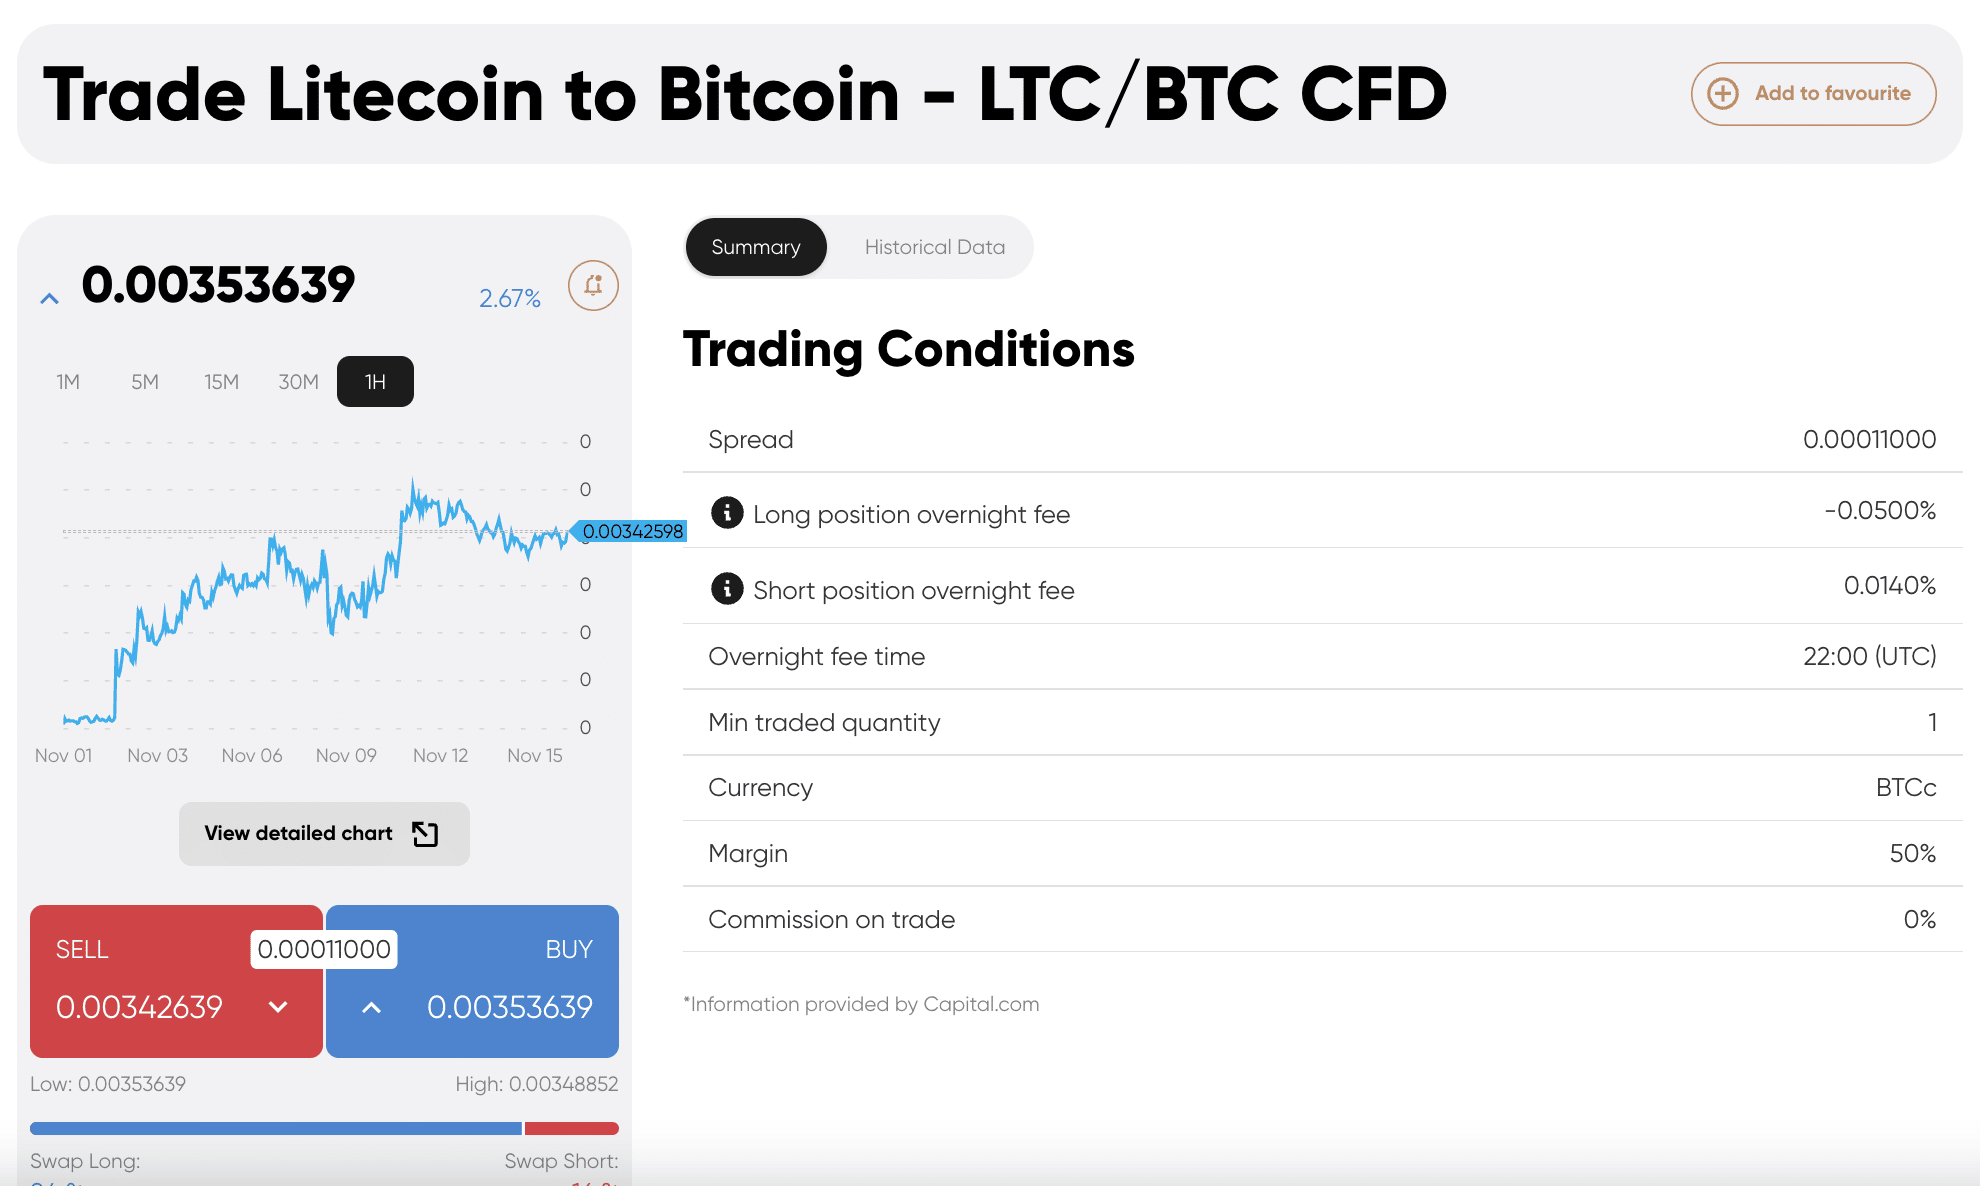 Trade Litecoin at Capital.com at 0% commission 